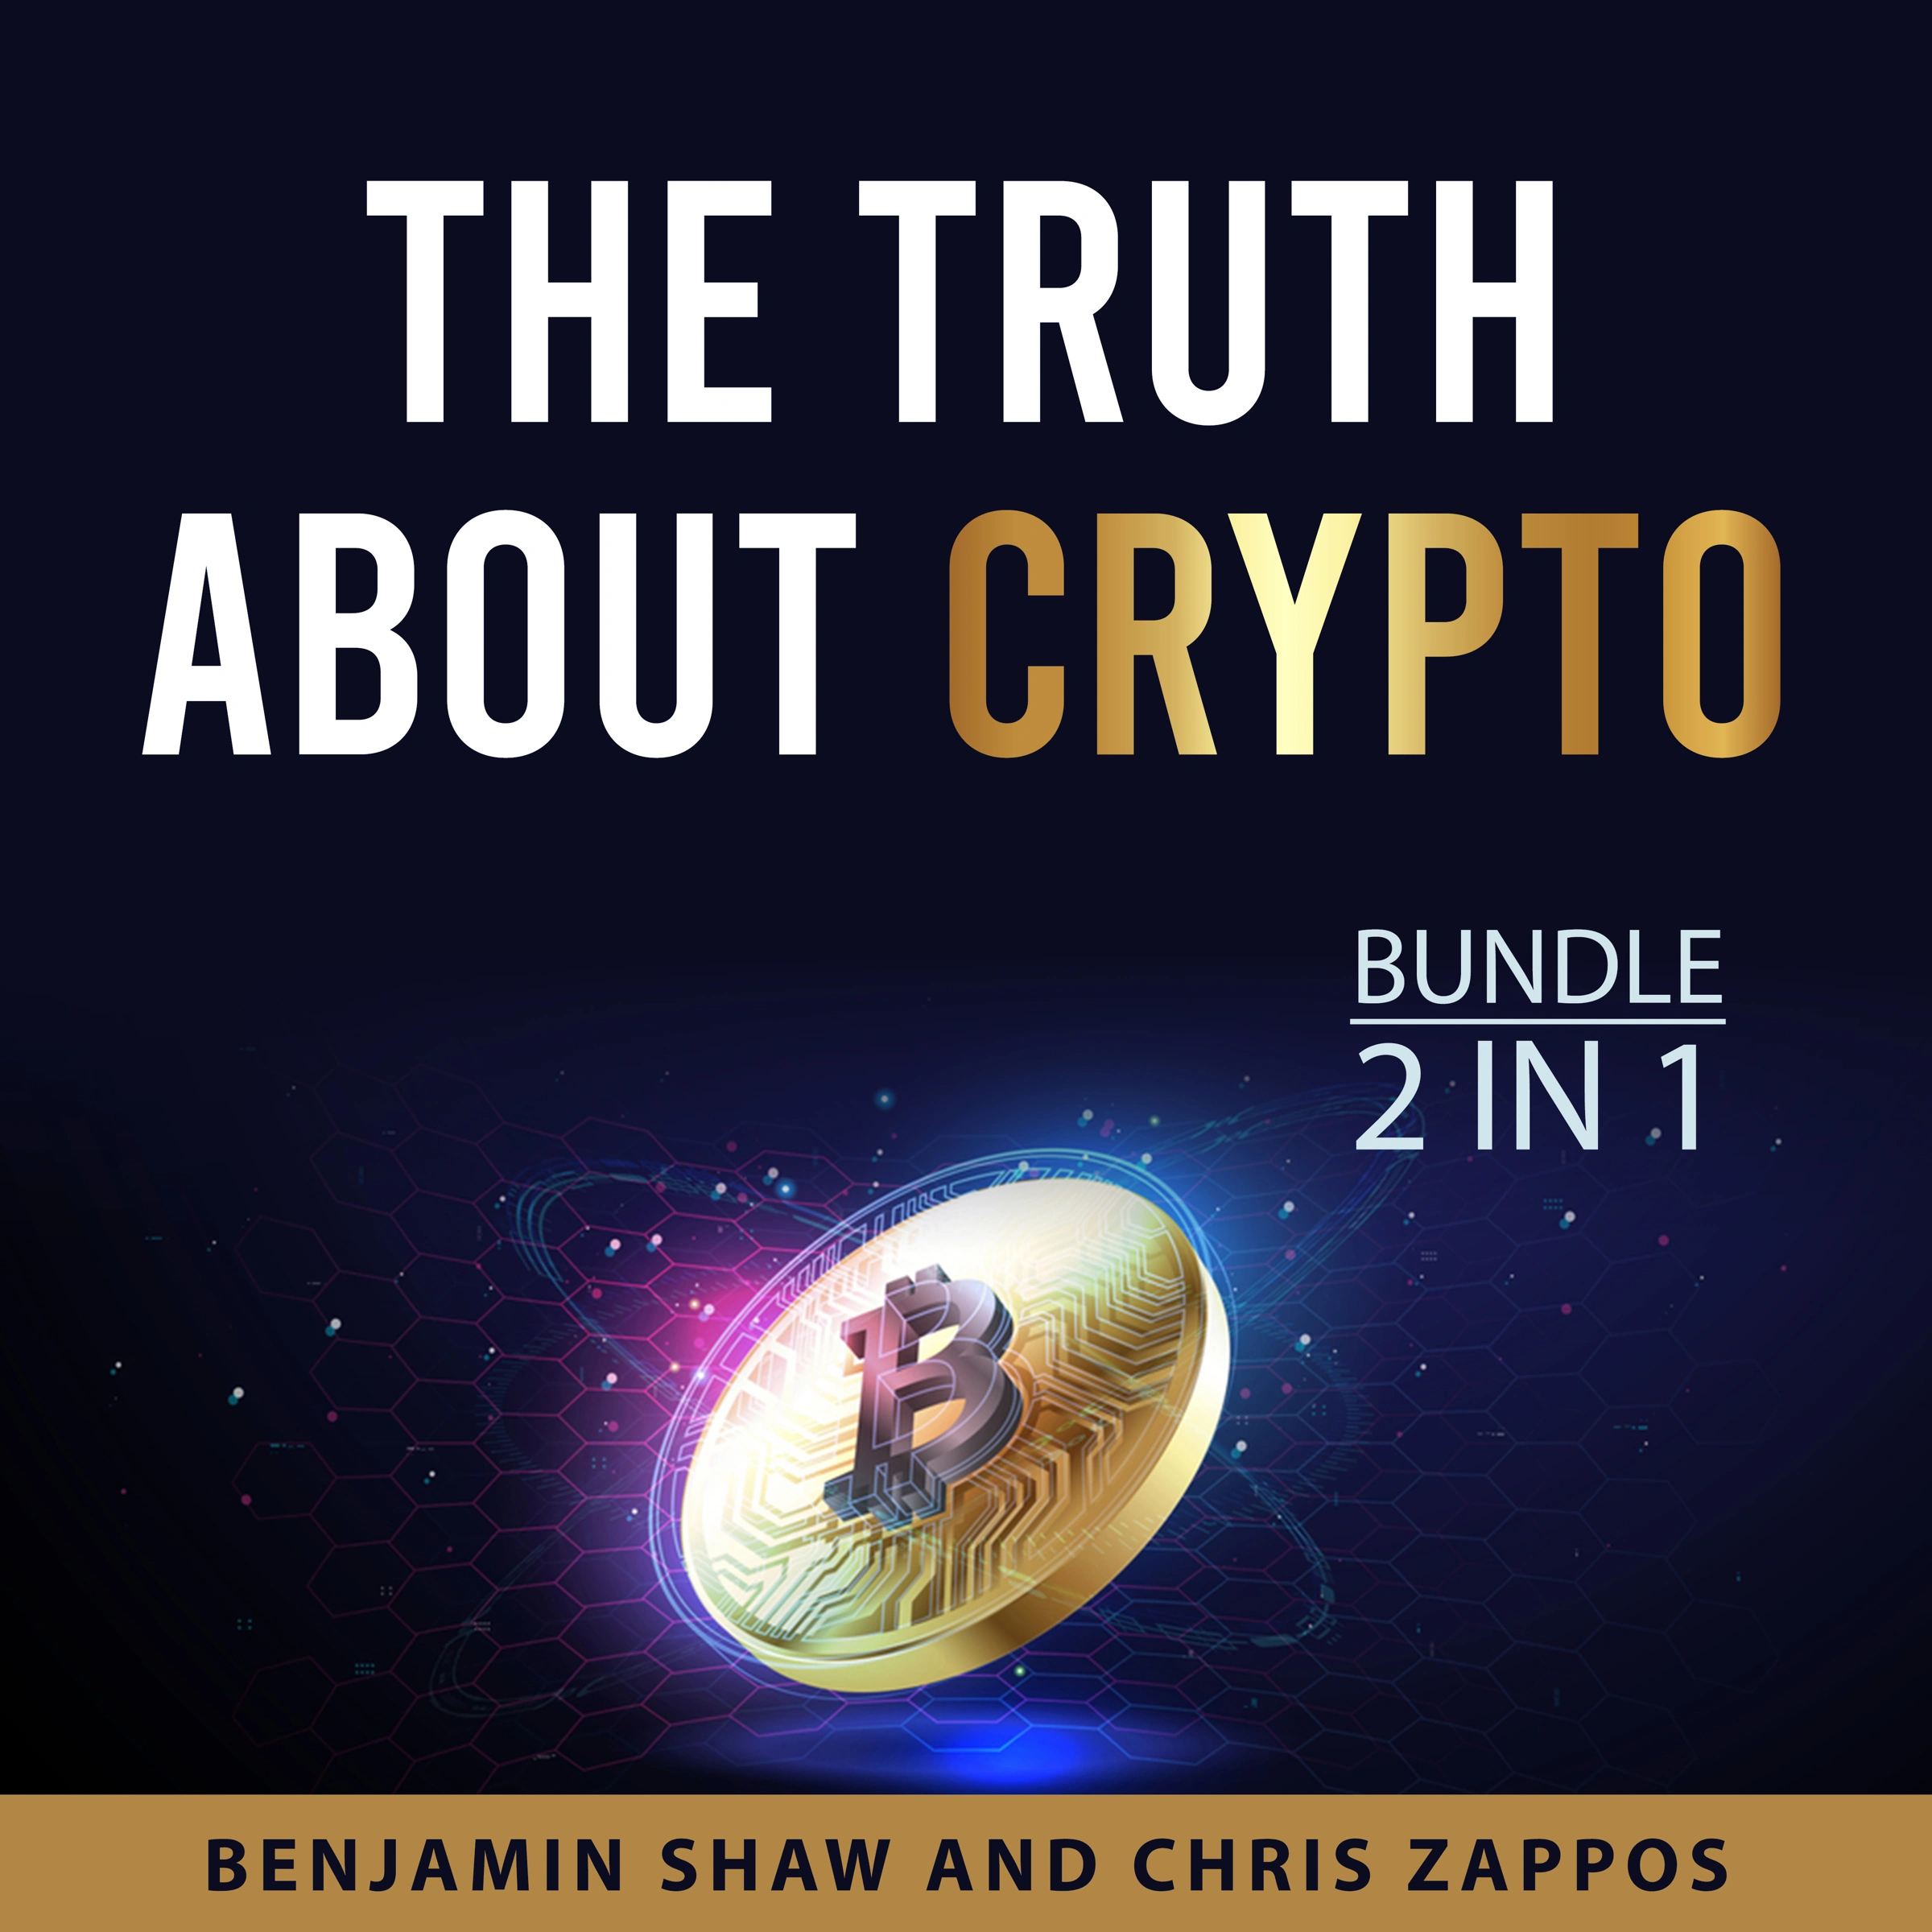 The Truth About Crypto Bundle, 2 in 1 Bundle by Chris Zappos Audiobook